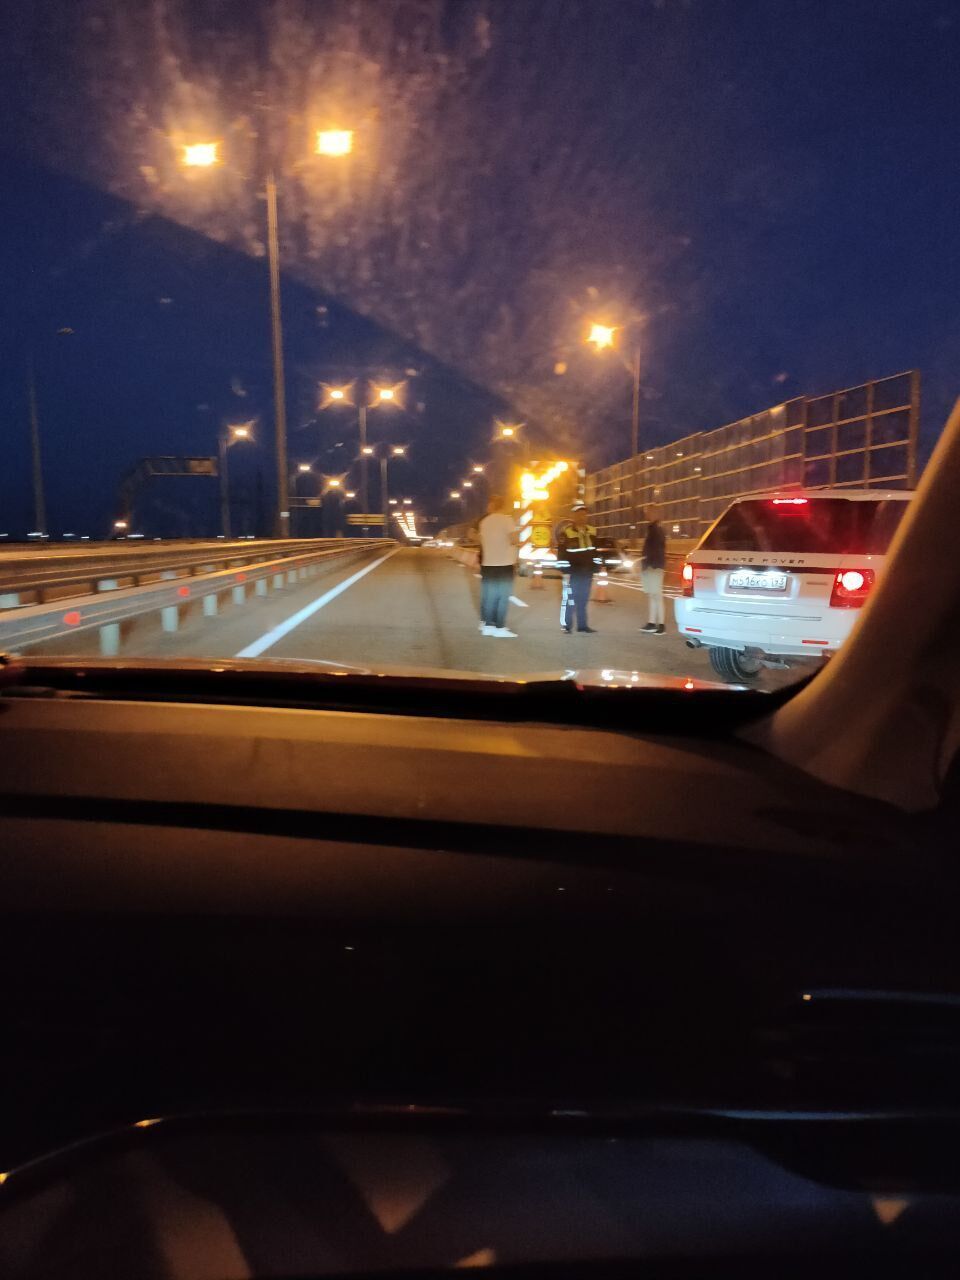 ''The slab of the bridge moved down'': eyewitnesses told about the moment and the consequences of the explosion on the Crimean bridge. Photo and video